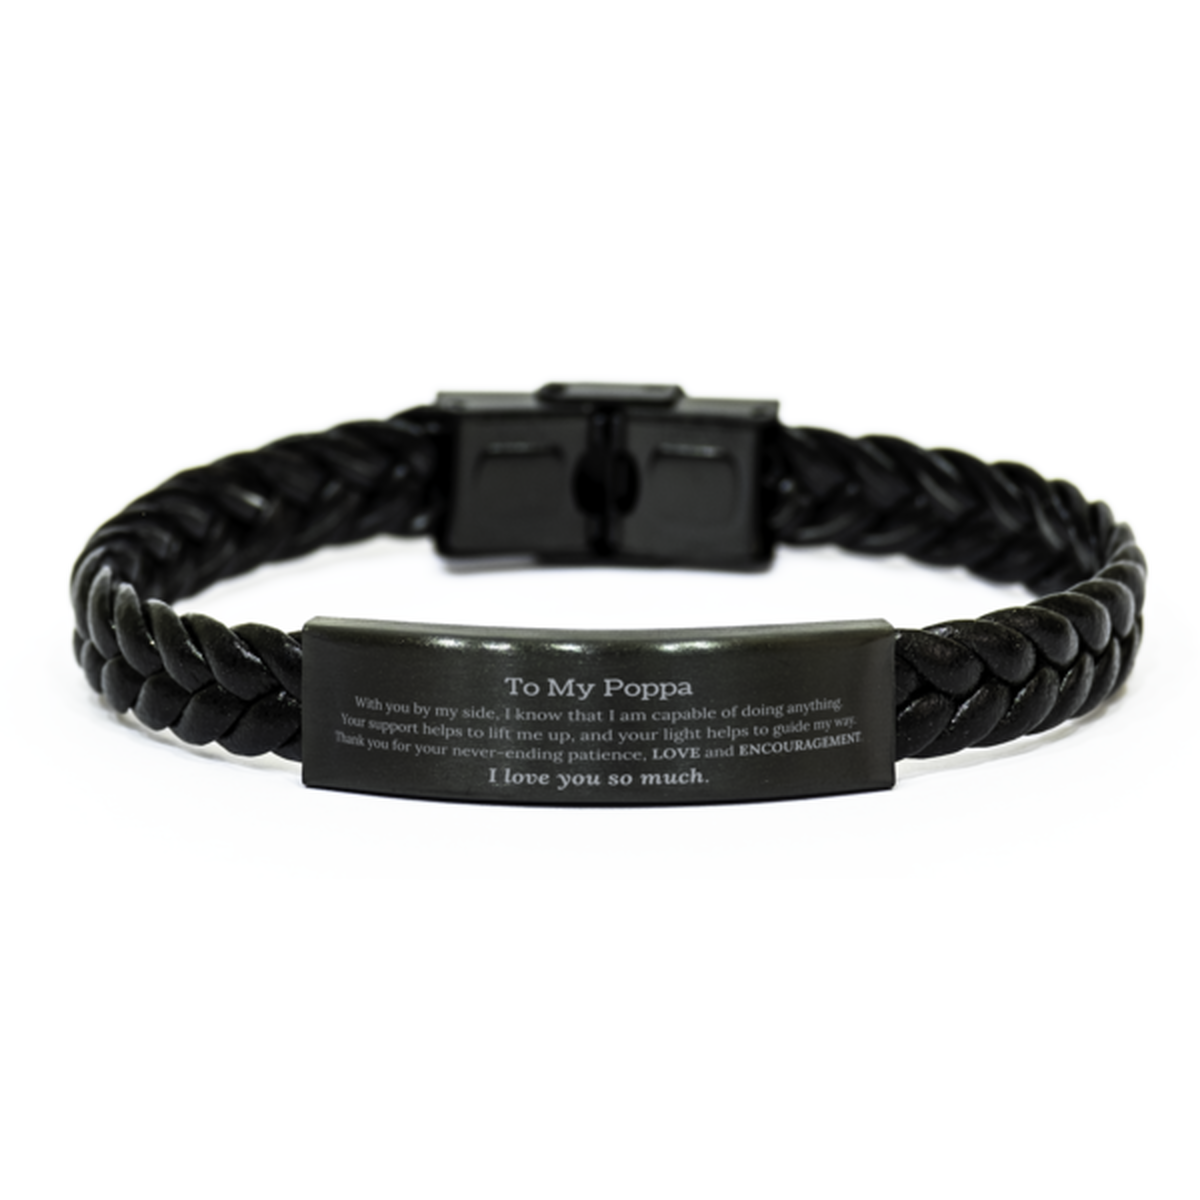 Appreciation Poppa Braided Leather Bracelet Gifts, To My Poppa Birthday Christmas Wedding Keepsake Gifts for Poppa With you by my side, I know that I am capable of doing anything. I love you so much